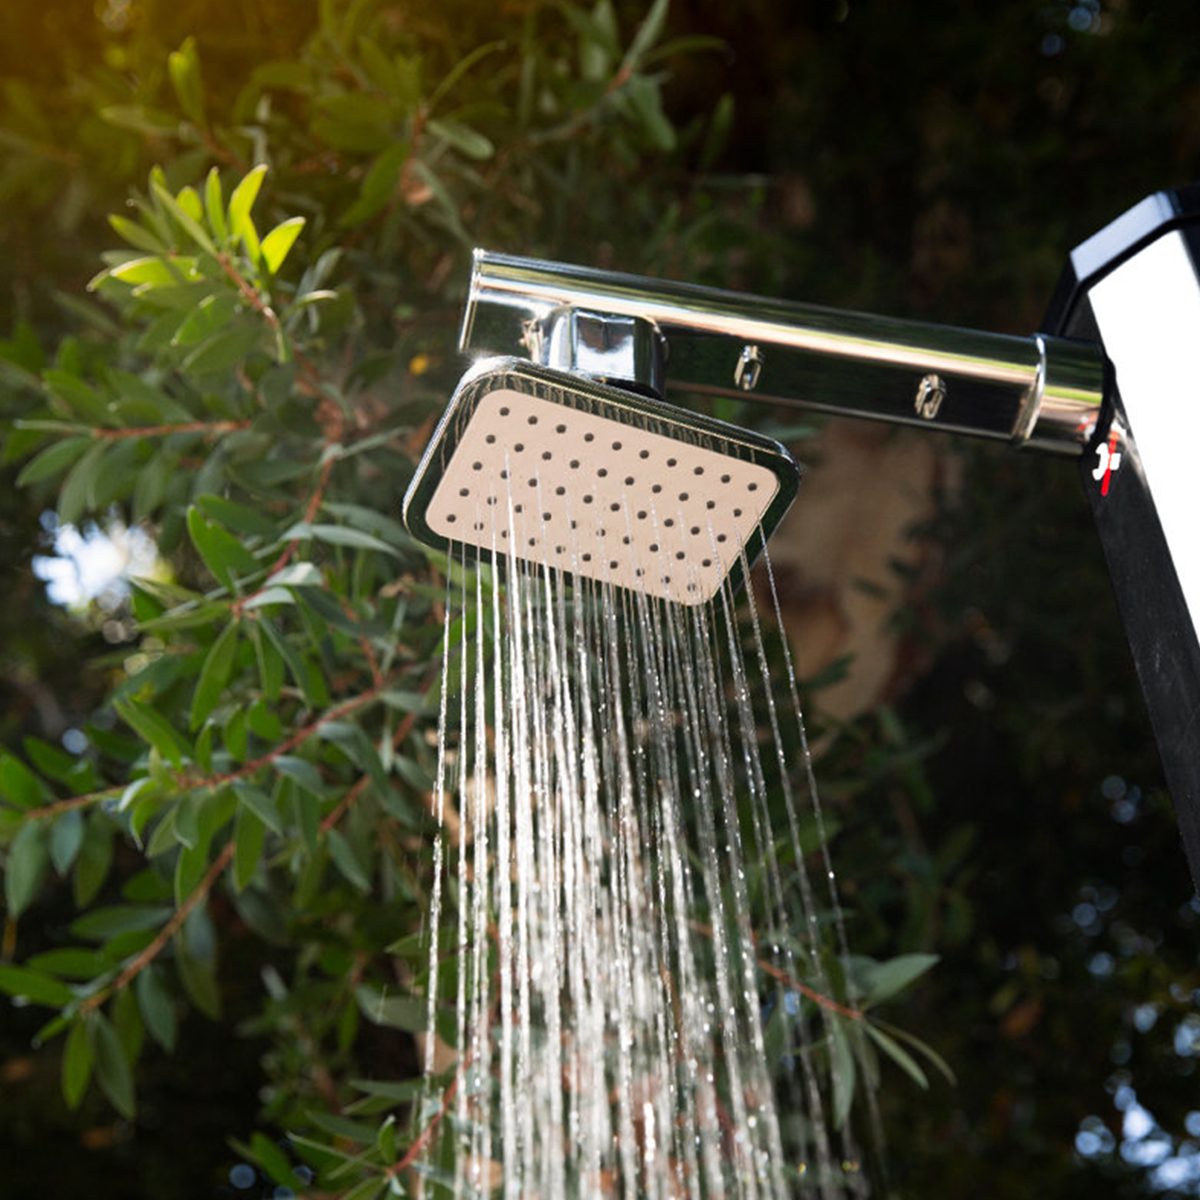 Healthy Food Delivery : 5 Best Outdoor Shower Kits for Backyards and ...